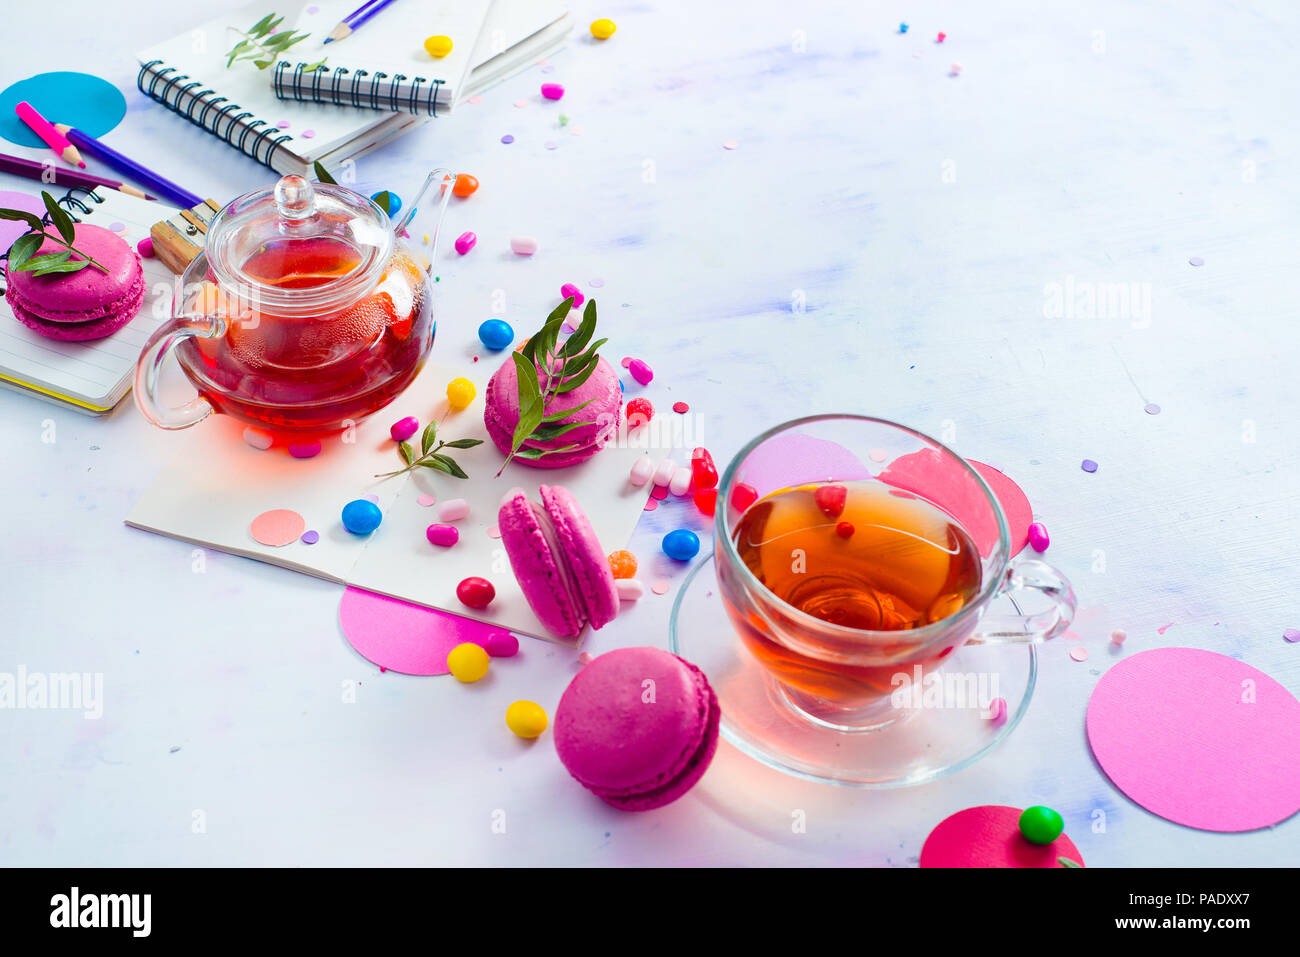 Glass teapot header with candies and confetti on a light background with copy space. Pink and purple palette still life. Vibrant tea party drinks concept Stock Photo